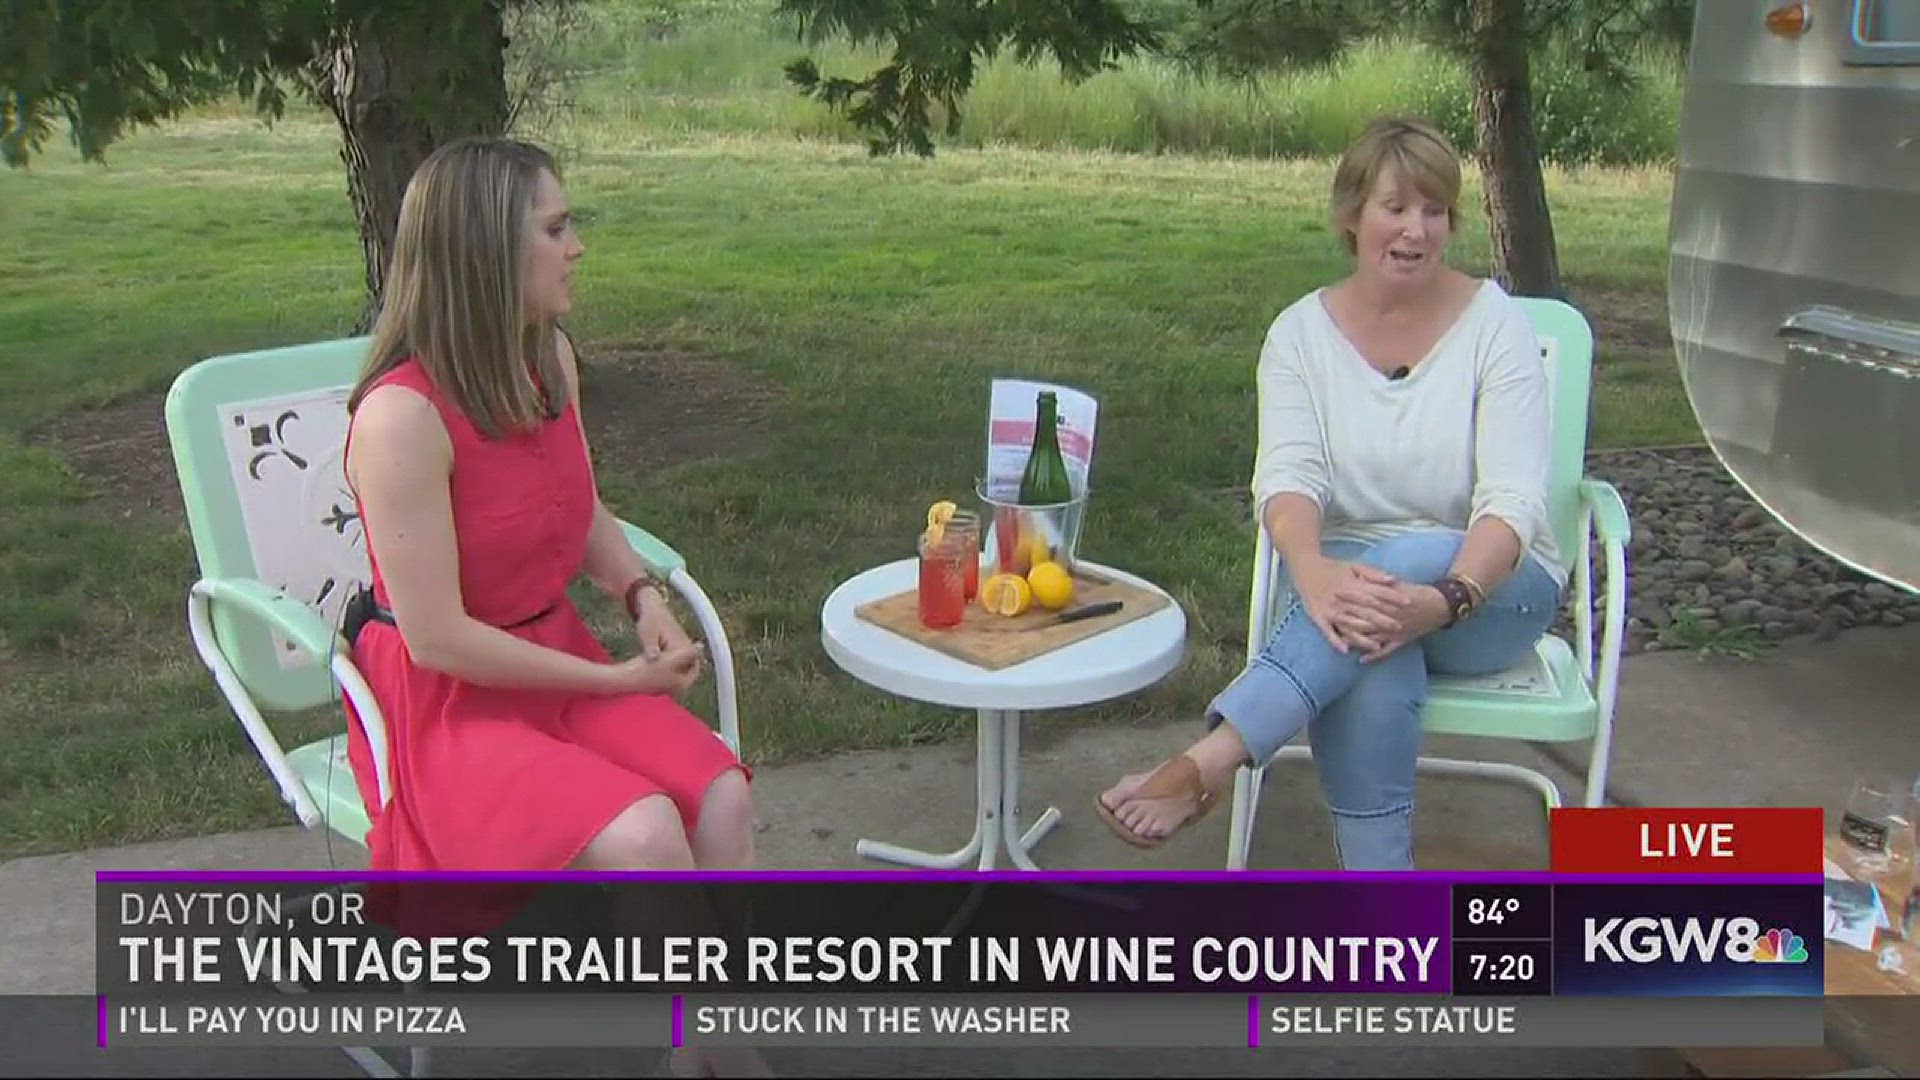 The Vintages Trailer Resort in Willamette wine country